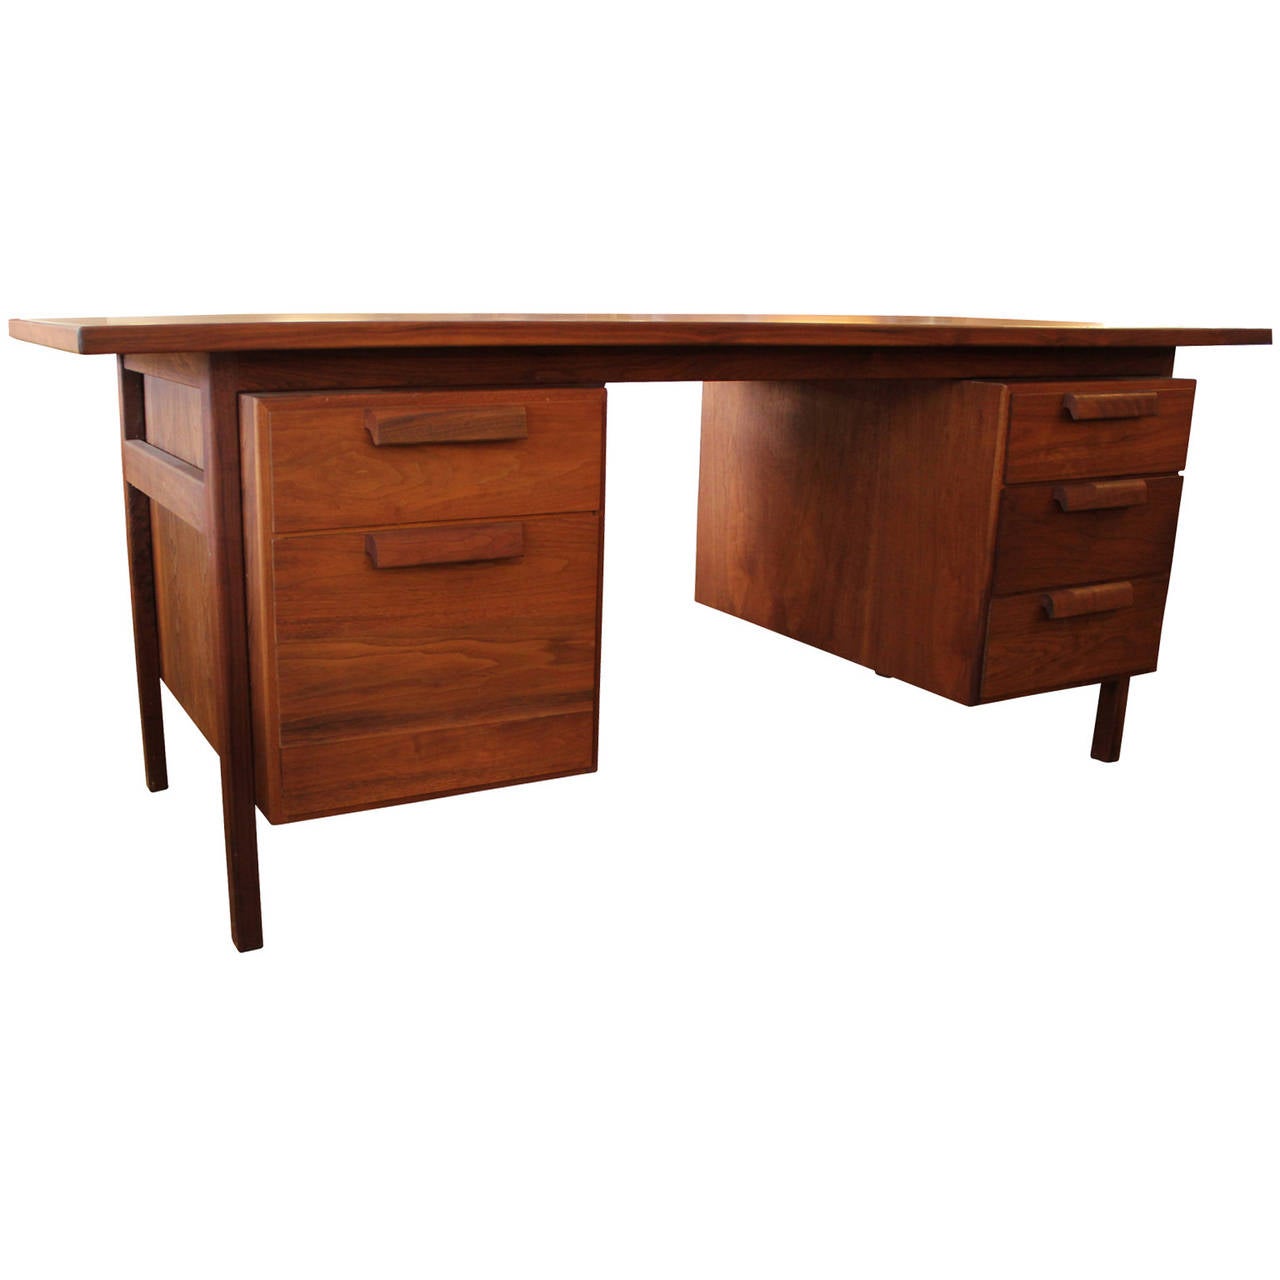 Wonderful rare executive desk by Jens Risom. Top drawers on either side open to reveal a sectioned space. Bottom left drawer is for filing. Original Tags still remains partially intact. Desk has a oiled walnut finish.